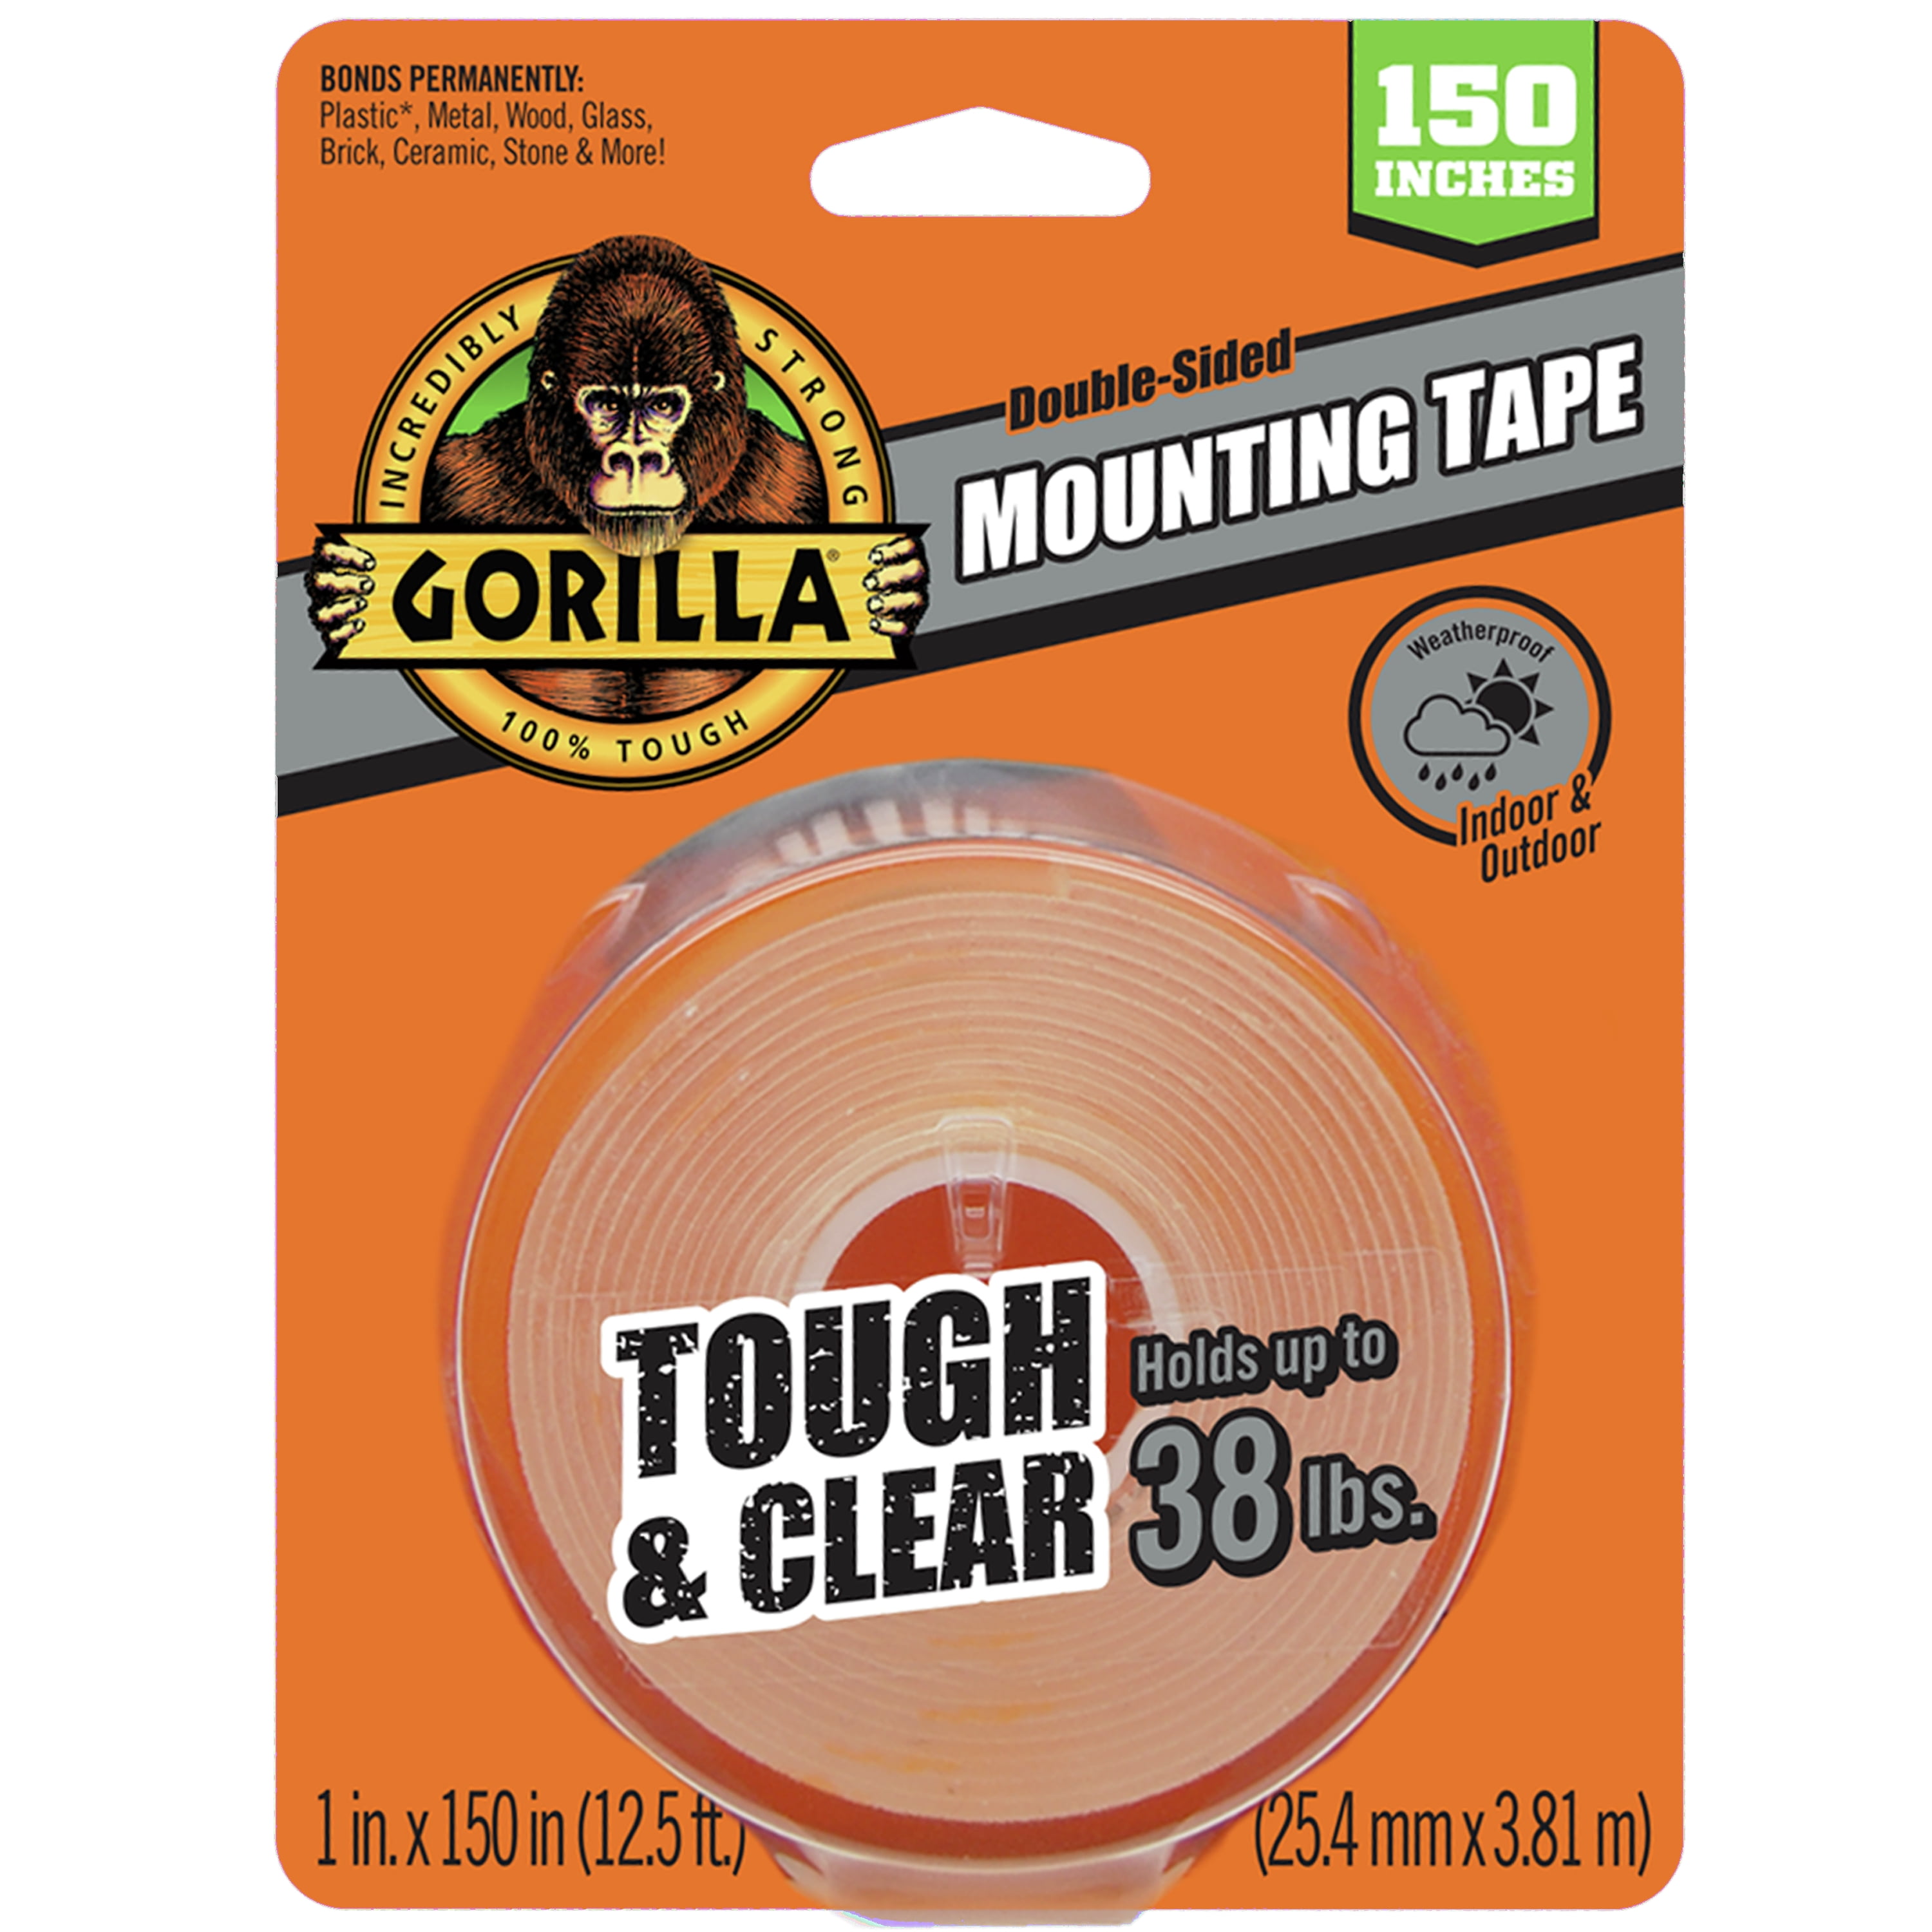 Gorilla HEAVY DUTY Mounting Tape Holds up to 30LB 2 PACK 